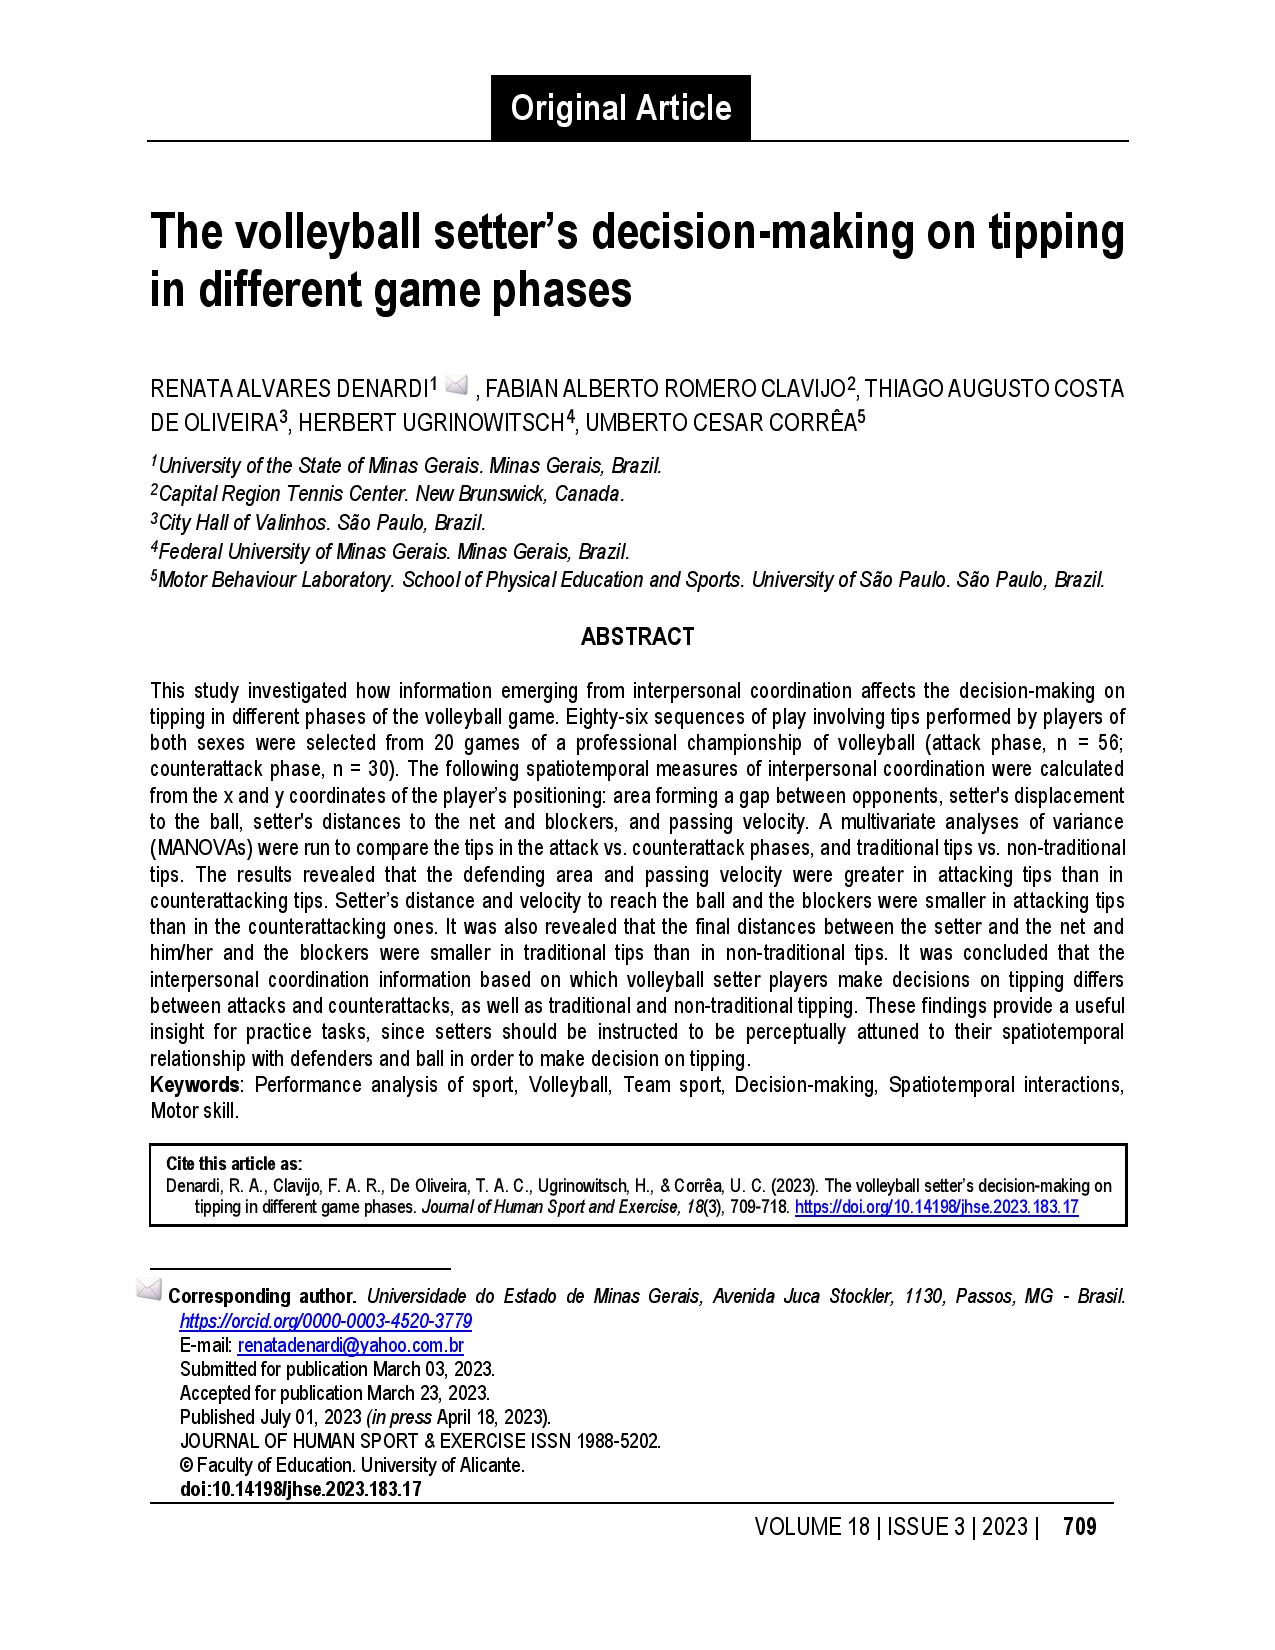 The volleyball setter’s decision-making on tipping in different game phases